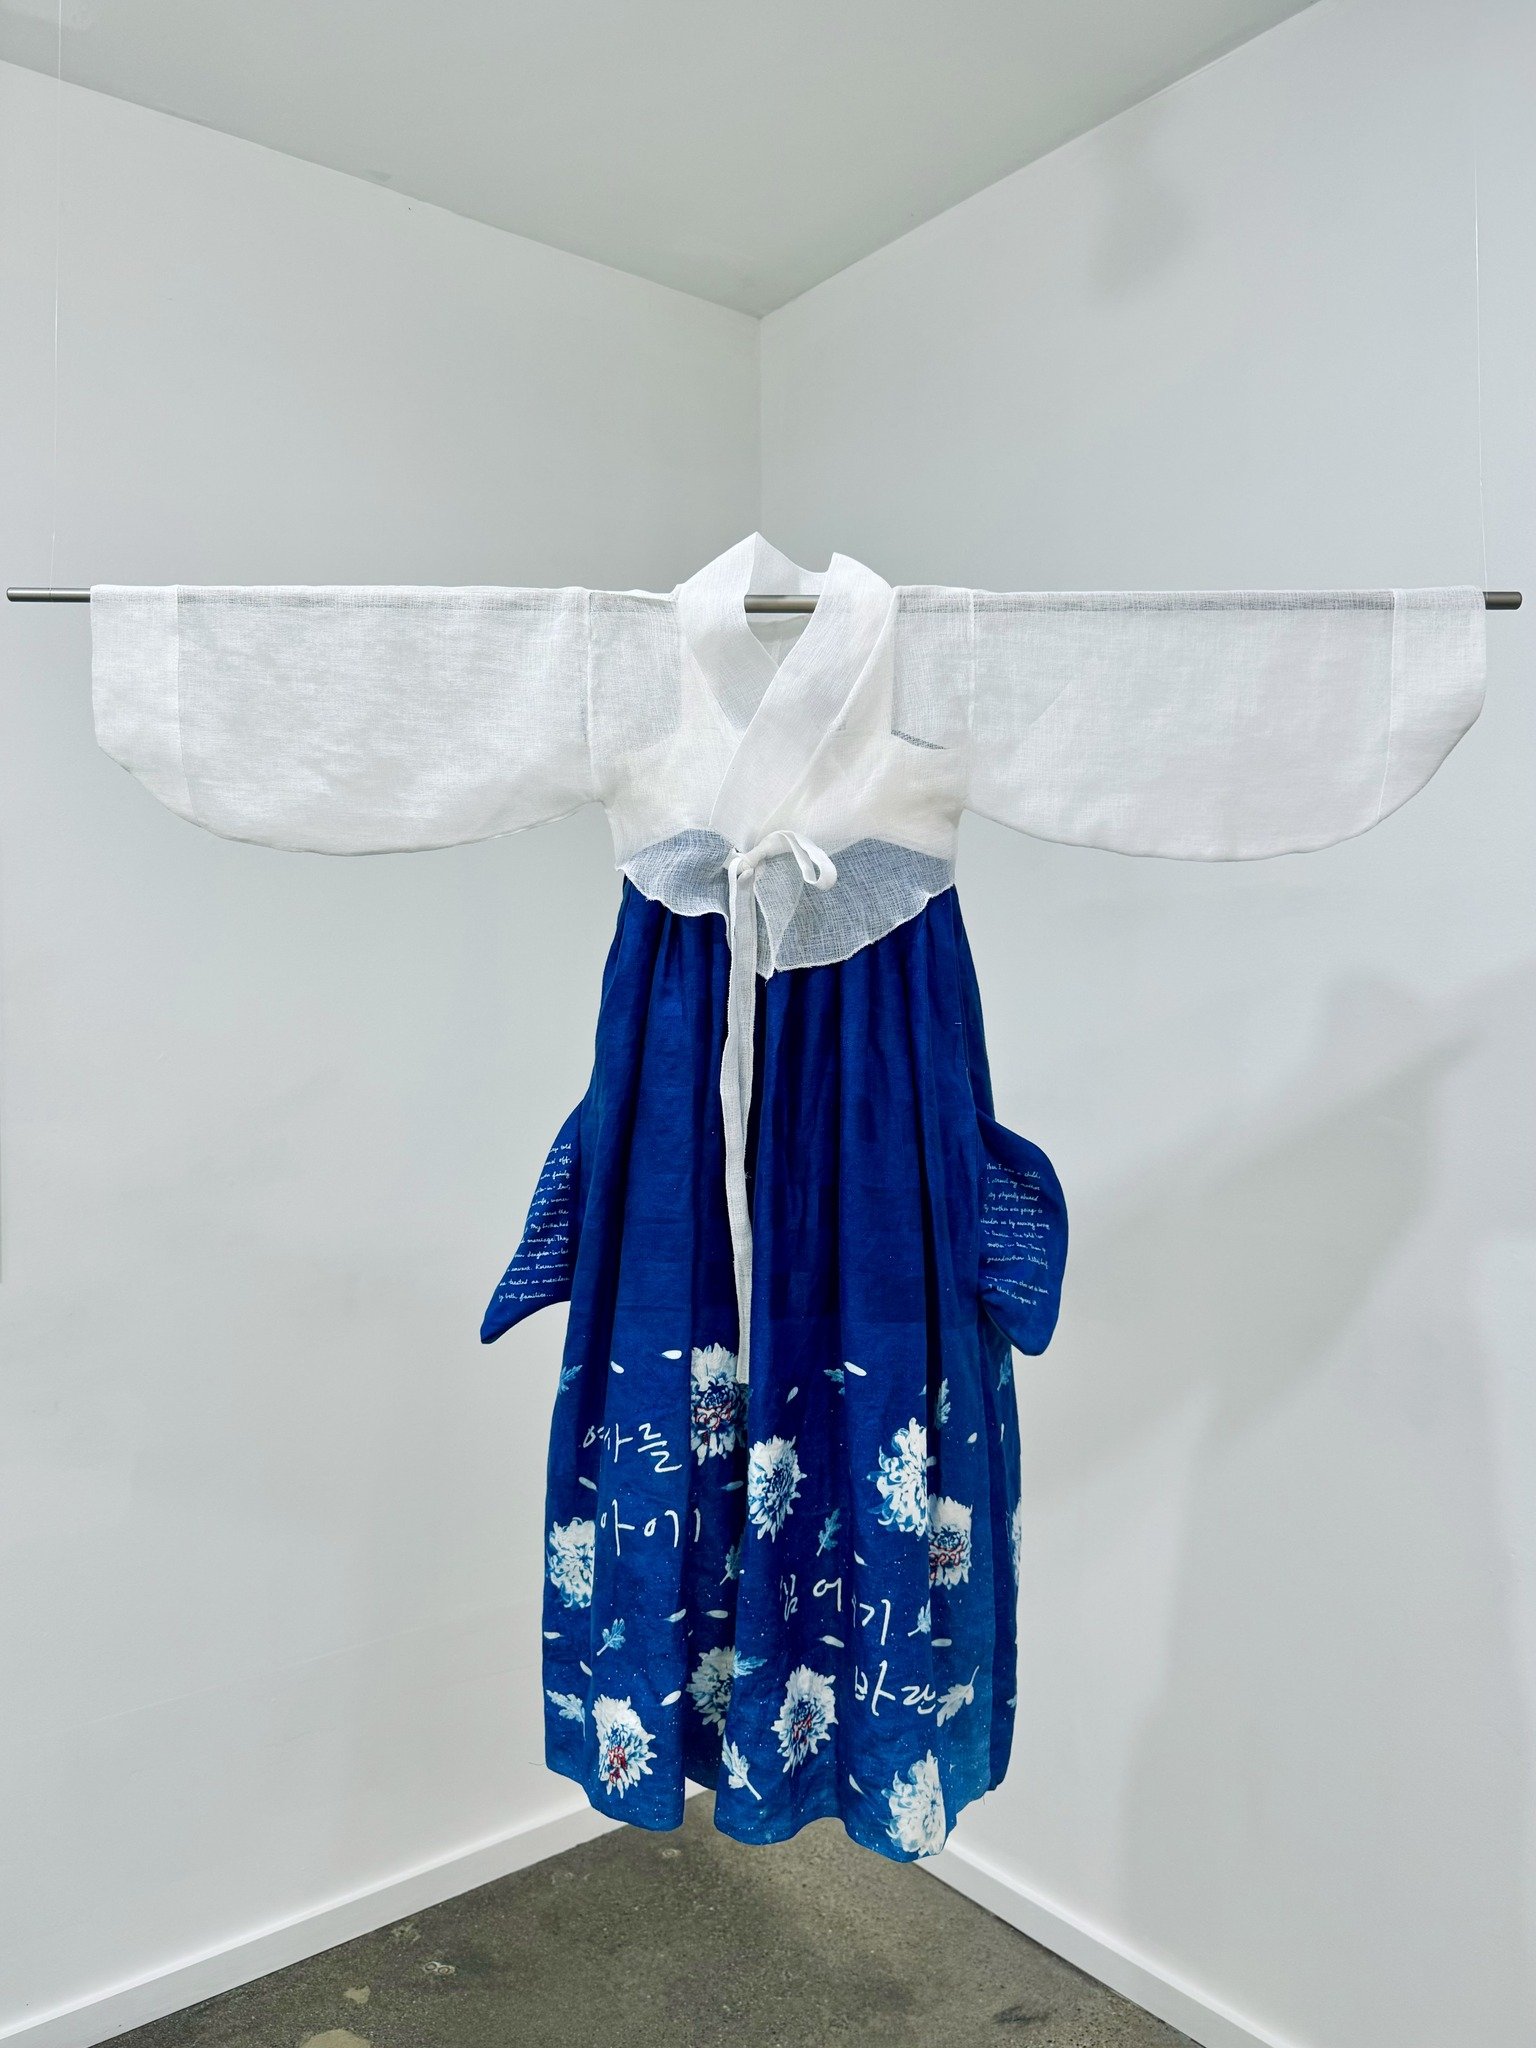 Curator's View! 🗣

&quot;Lee Bassuet gives new life to previously used fabrics, recognizing the personal and collective memories clothing holds. This hanbok, a traditional Korean dress, tells the generational stories of women in the artist&rsquo;s f